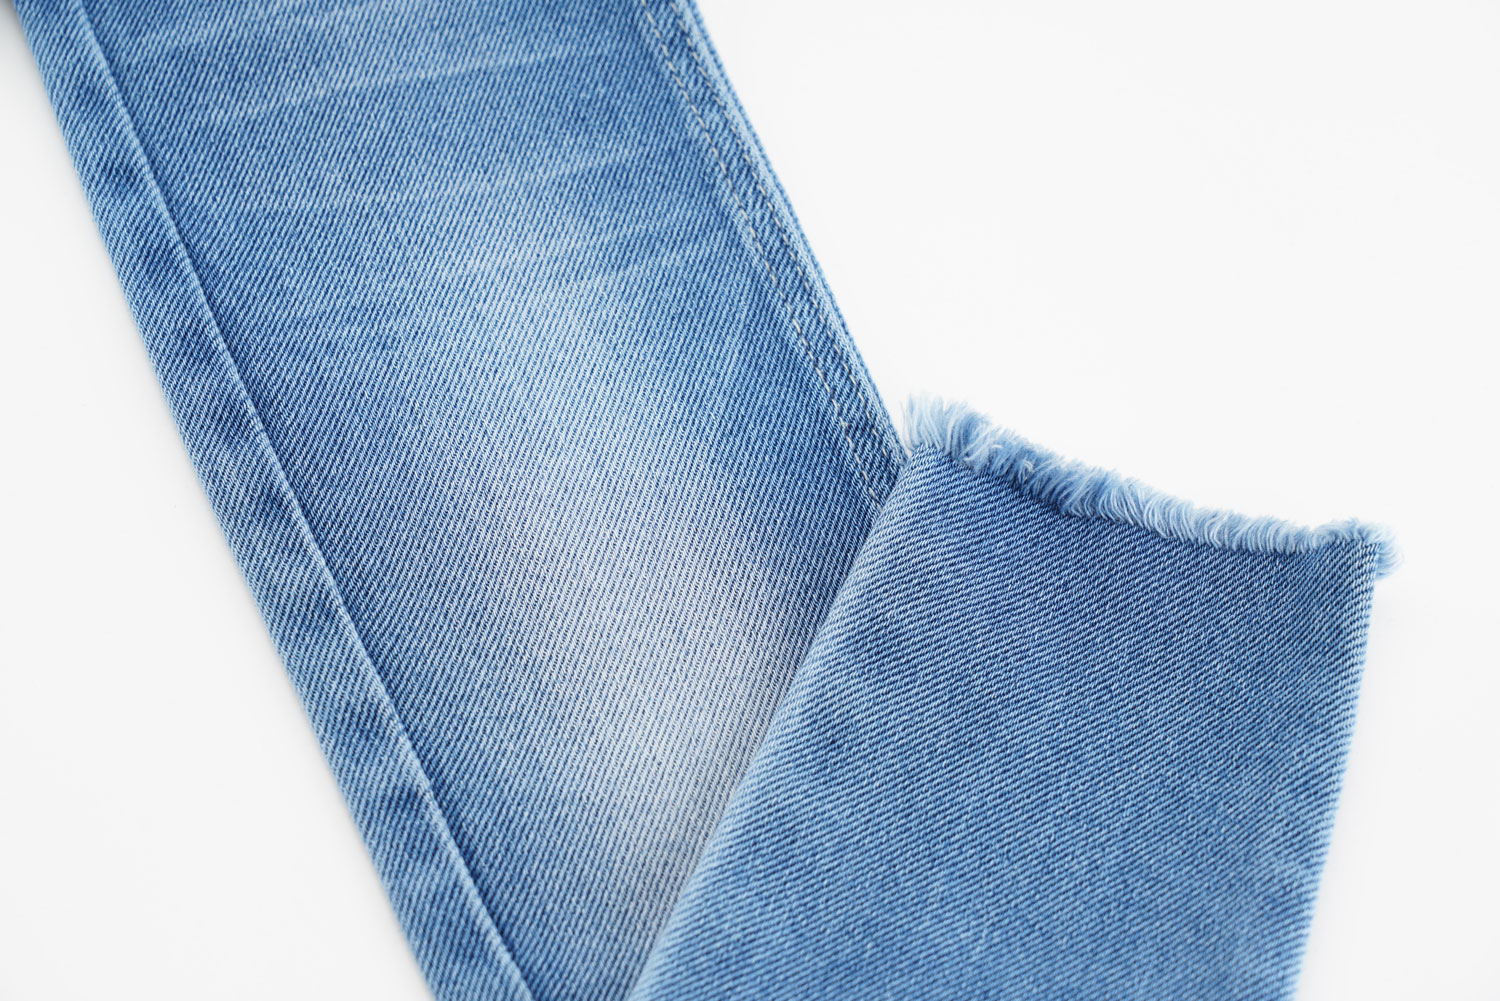 Dyeing and Color Classification of Denim 1